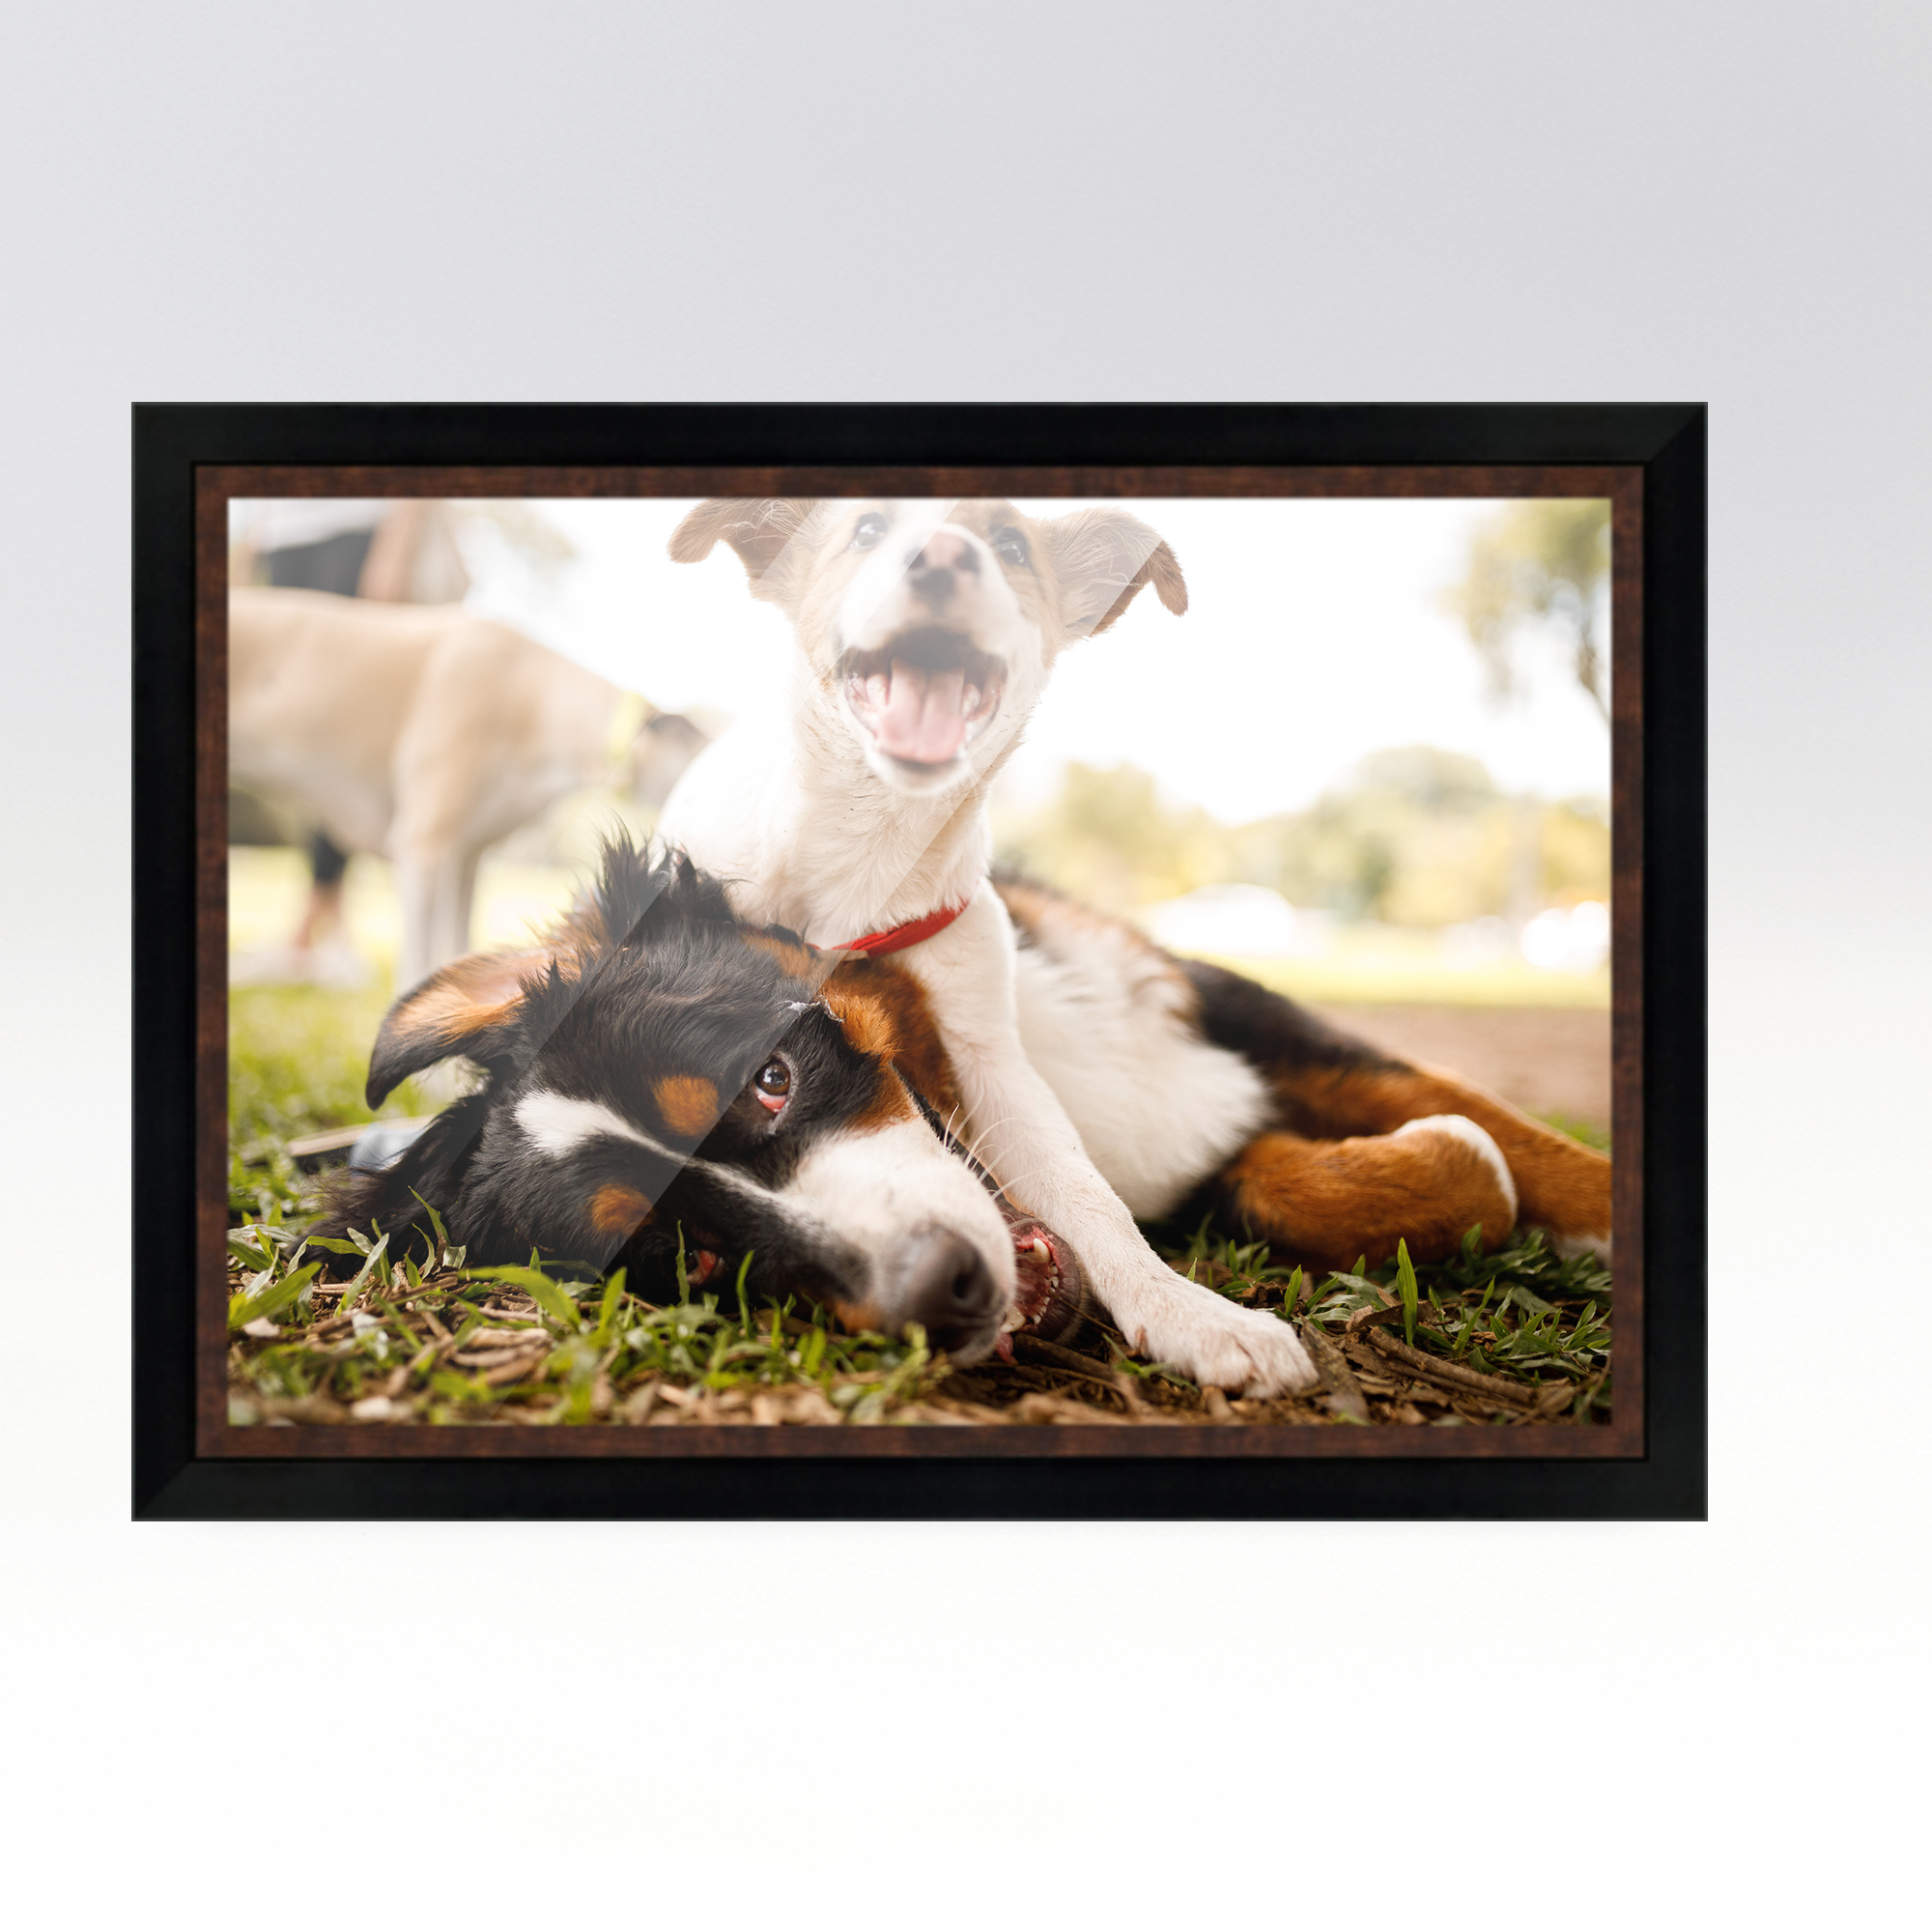 5x7 Rustic Brown Real Wood Picture Frame Width 1.25 inches Interior Frame  Depth 0.75 inches